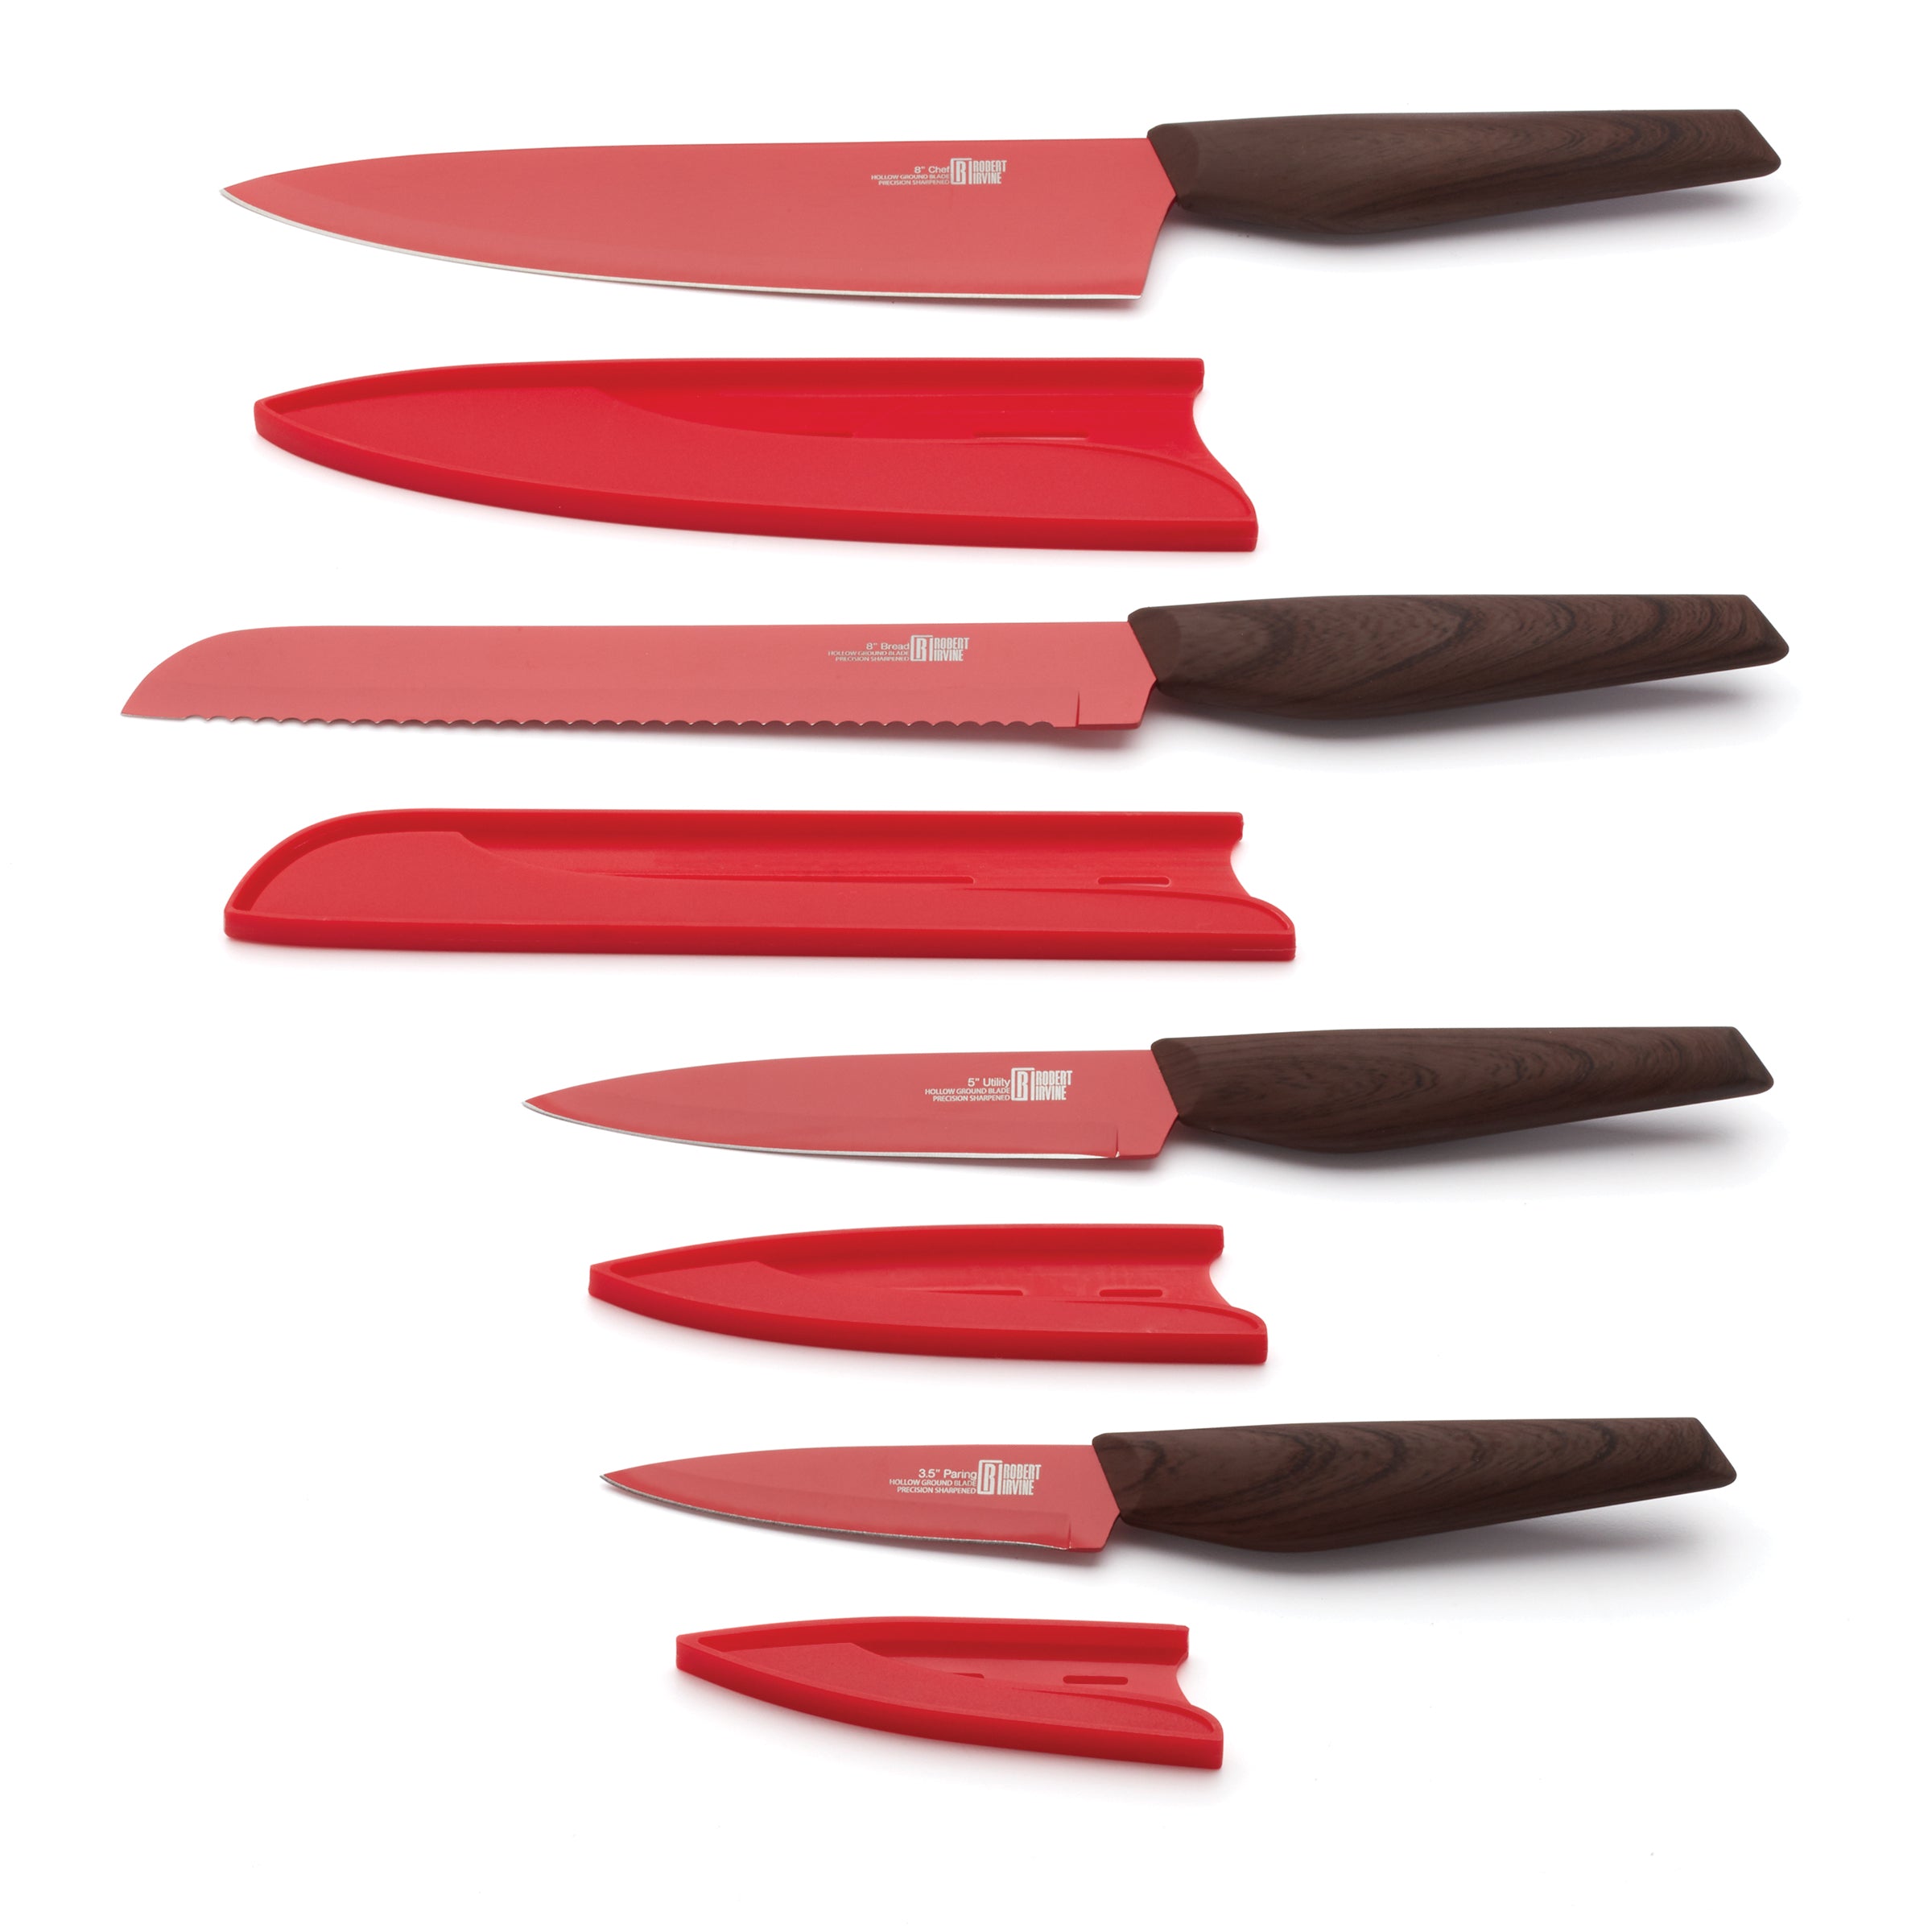 6 Piece Stainless Steel Blades Silicone Handles & Sheaths Prof CHEF KNIFE  SET 